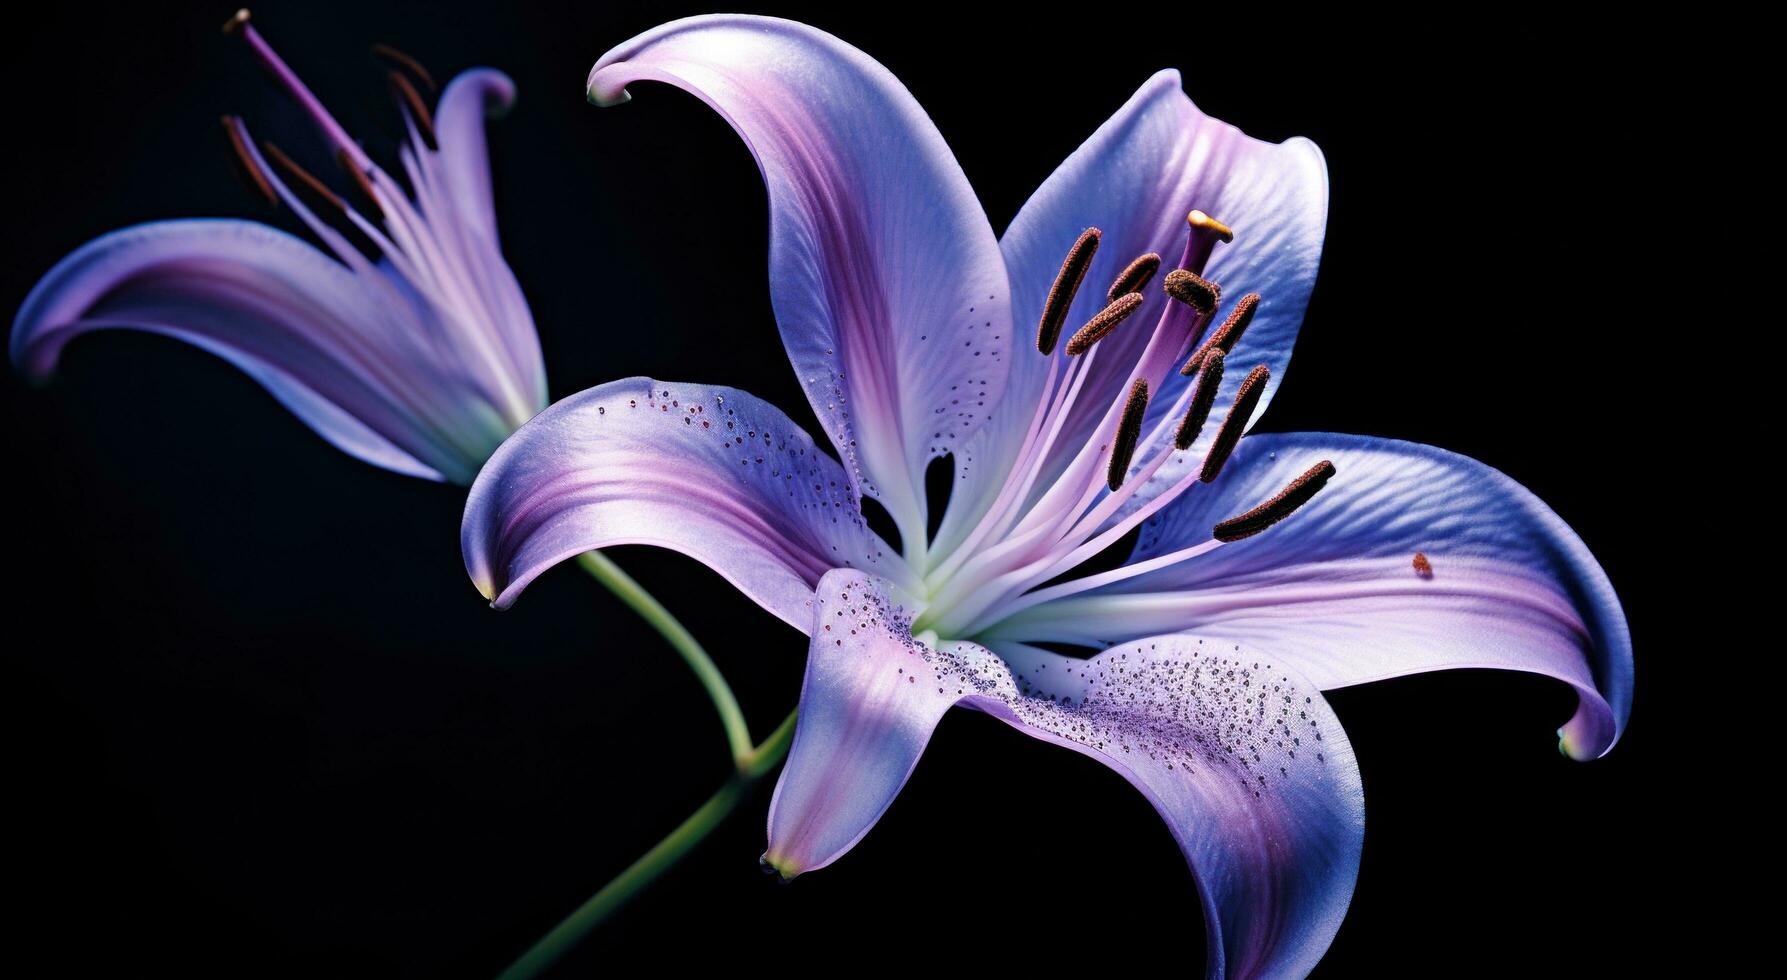 AI generated an image of a purple lily photo